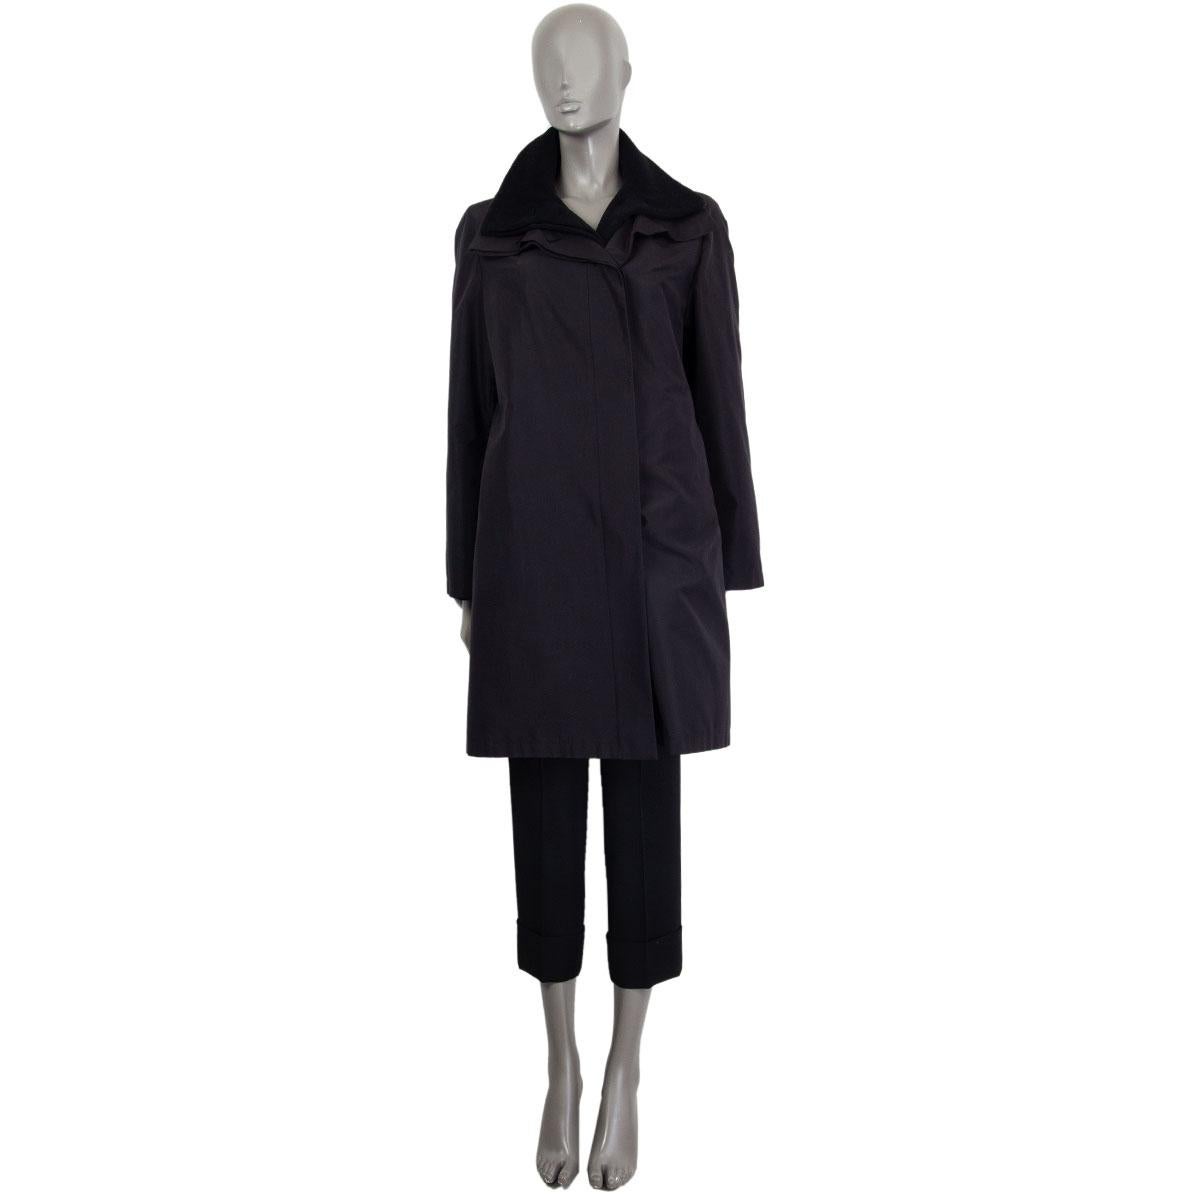 100% authentic Akris double layer coat in black silk (100%) with a stand collar. Closes on the front with buttons. Partially lined in viscose (100%). Inner layer coat is in black angora (50%) and wool (50%) with a stand collar and slit pockets.